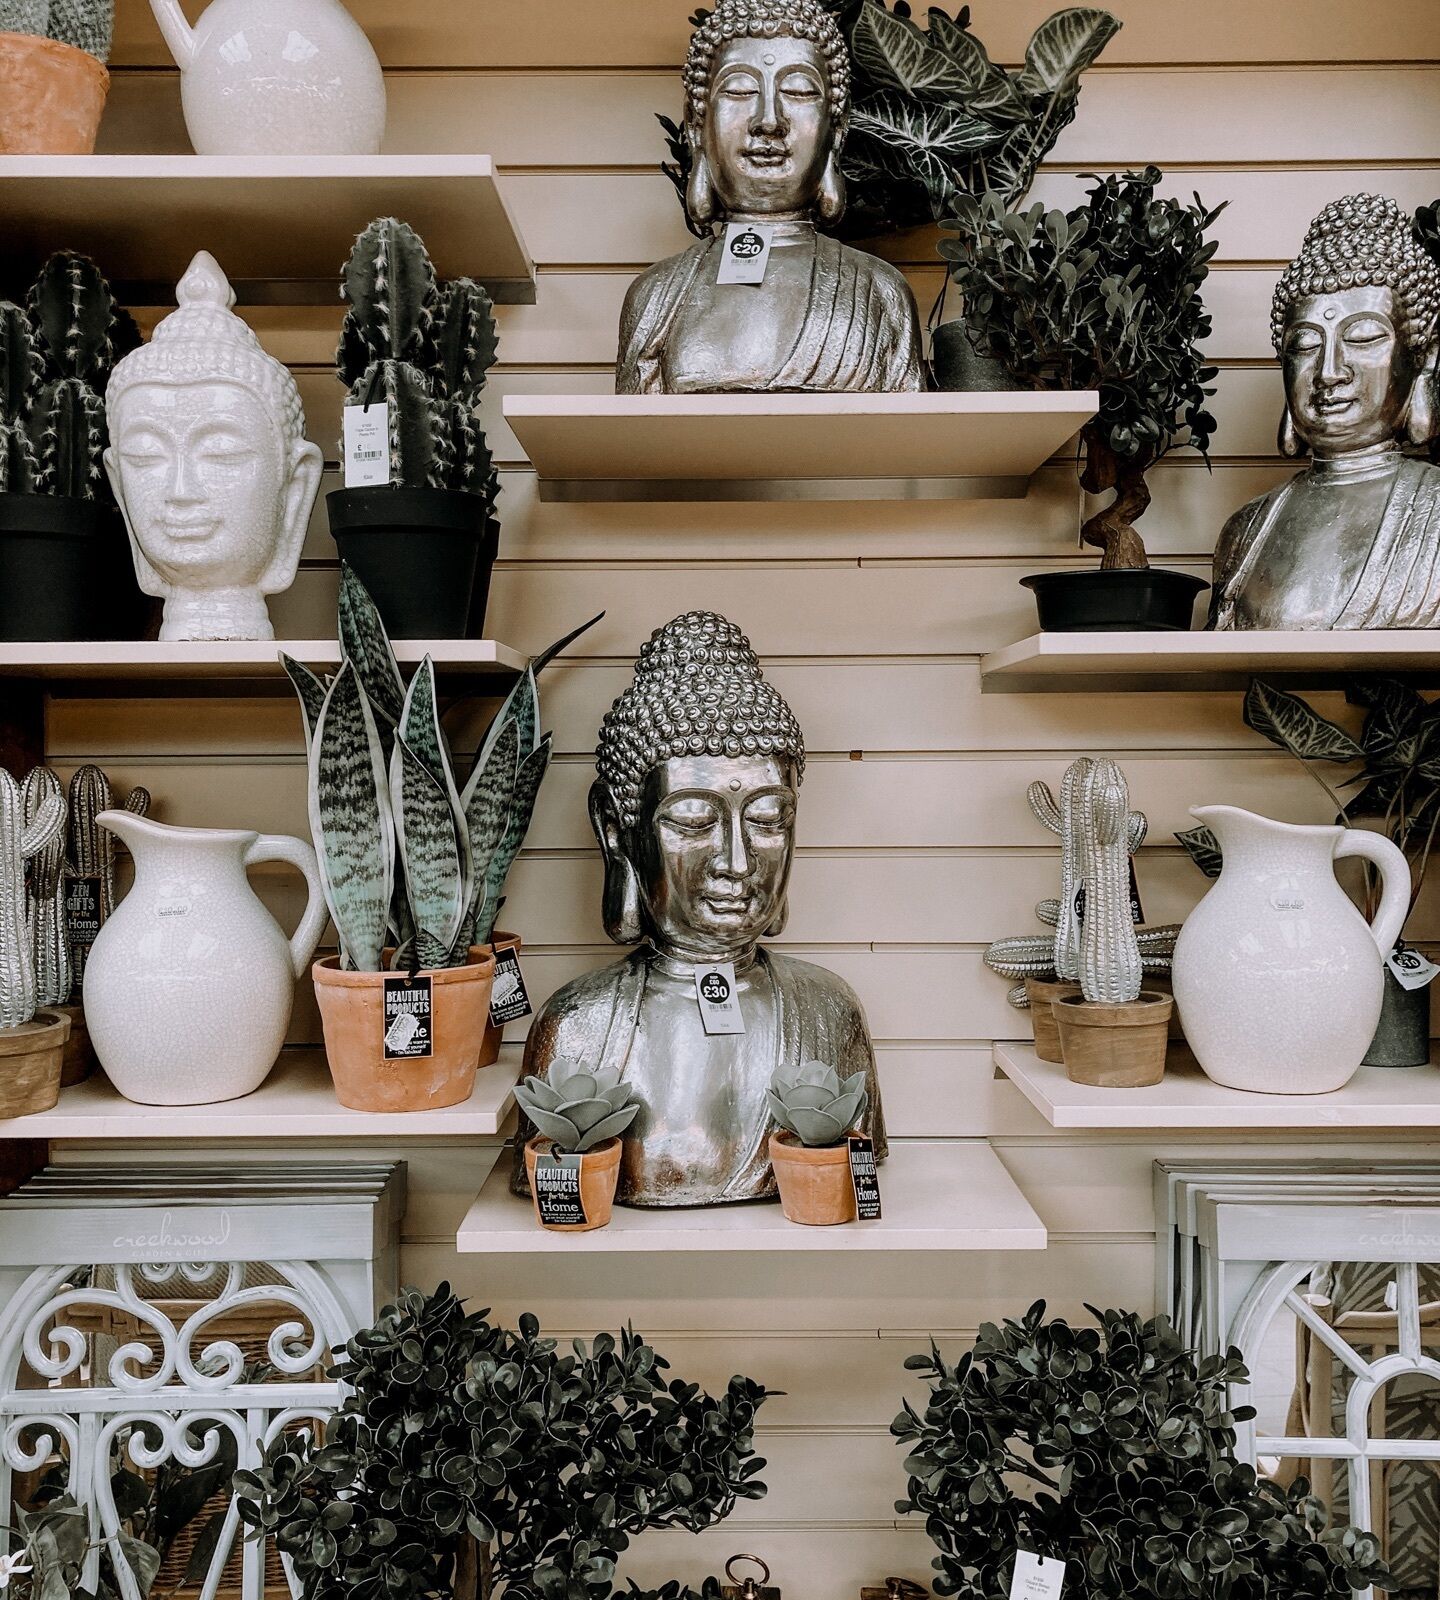 Store display mixing vases, statues, pitchers and plants in whites, greens, and silver